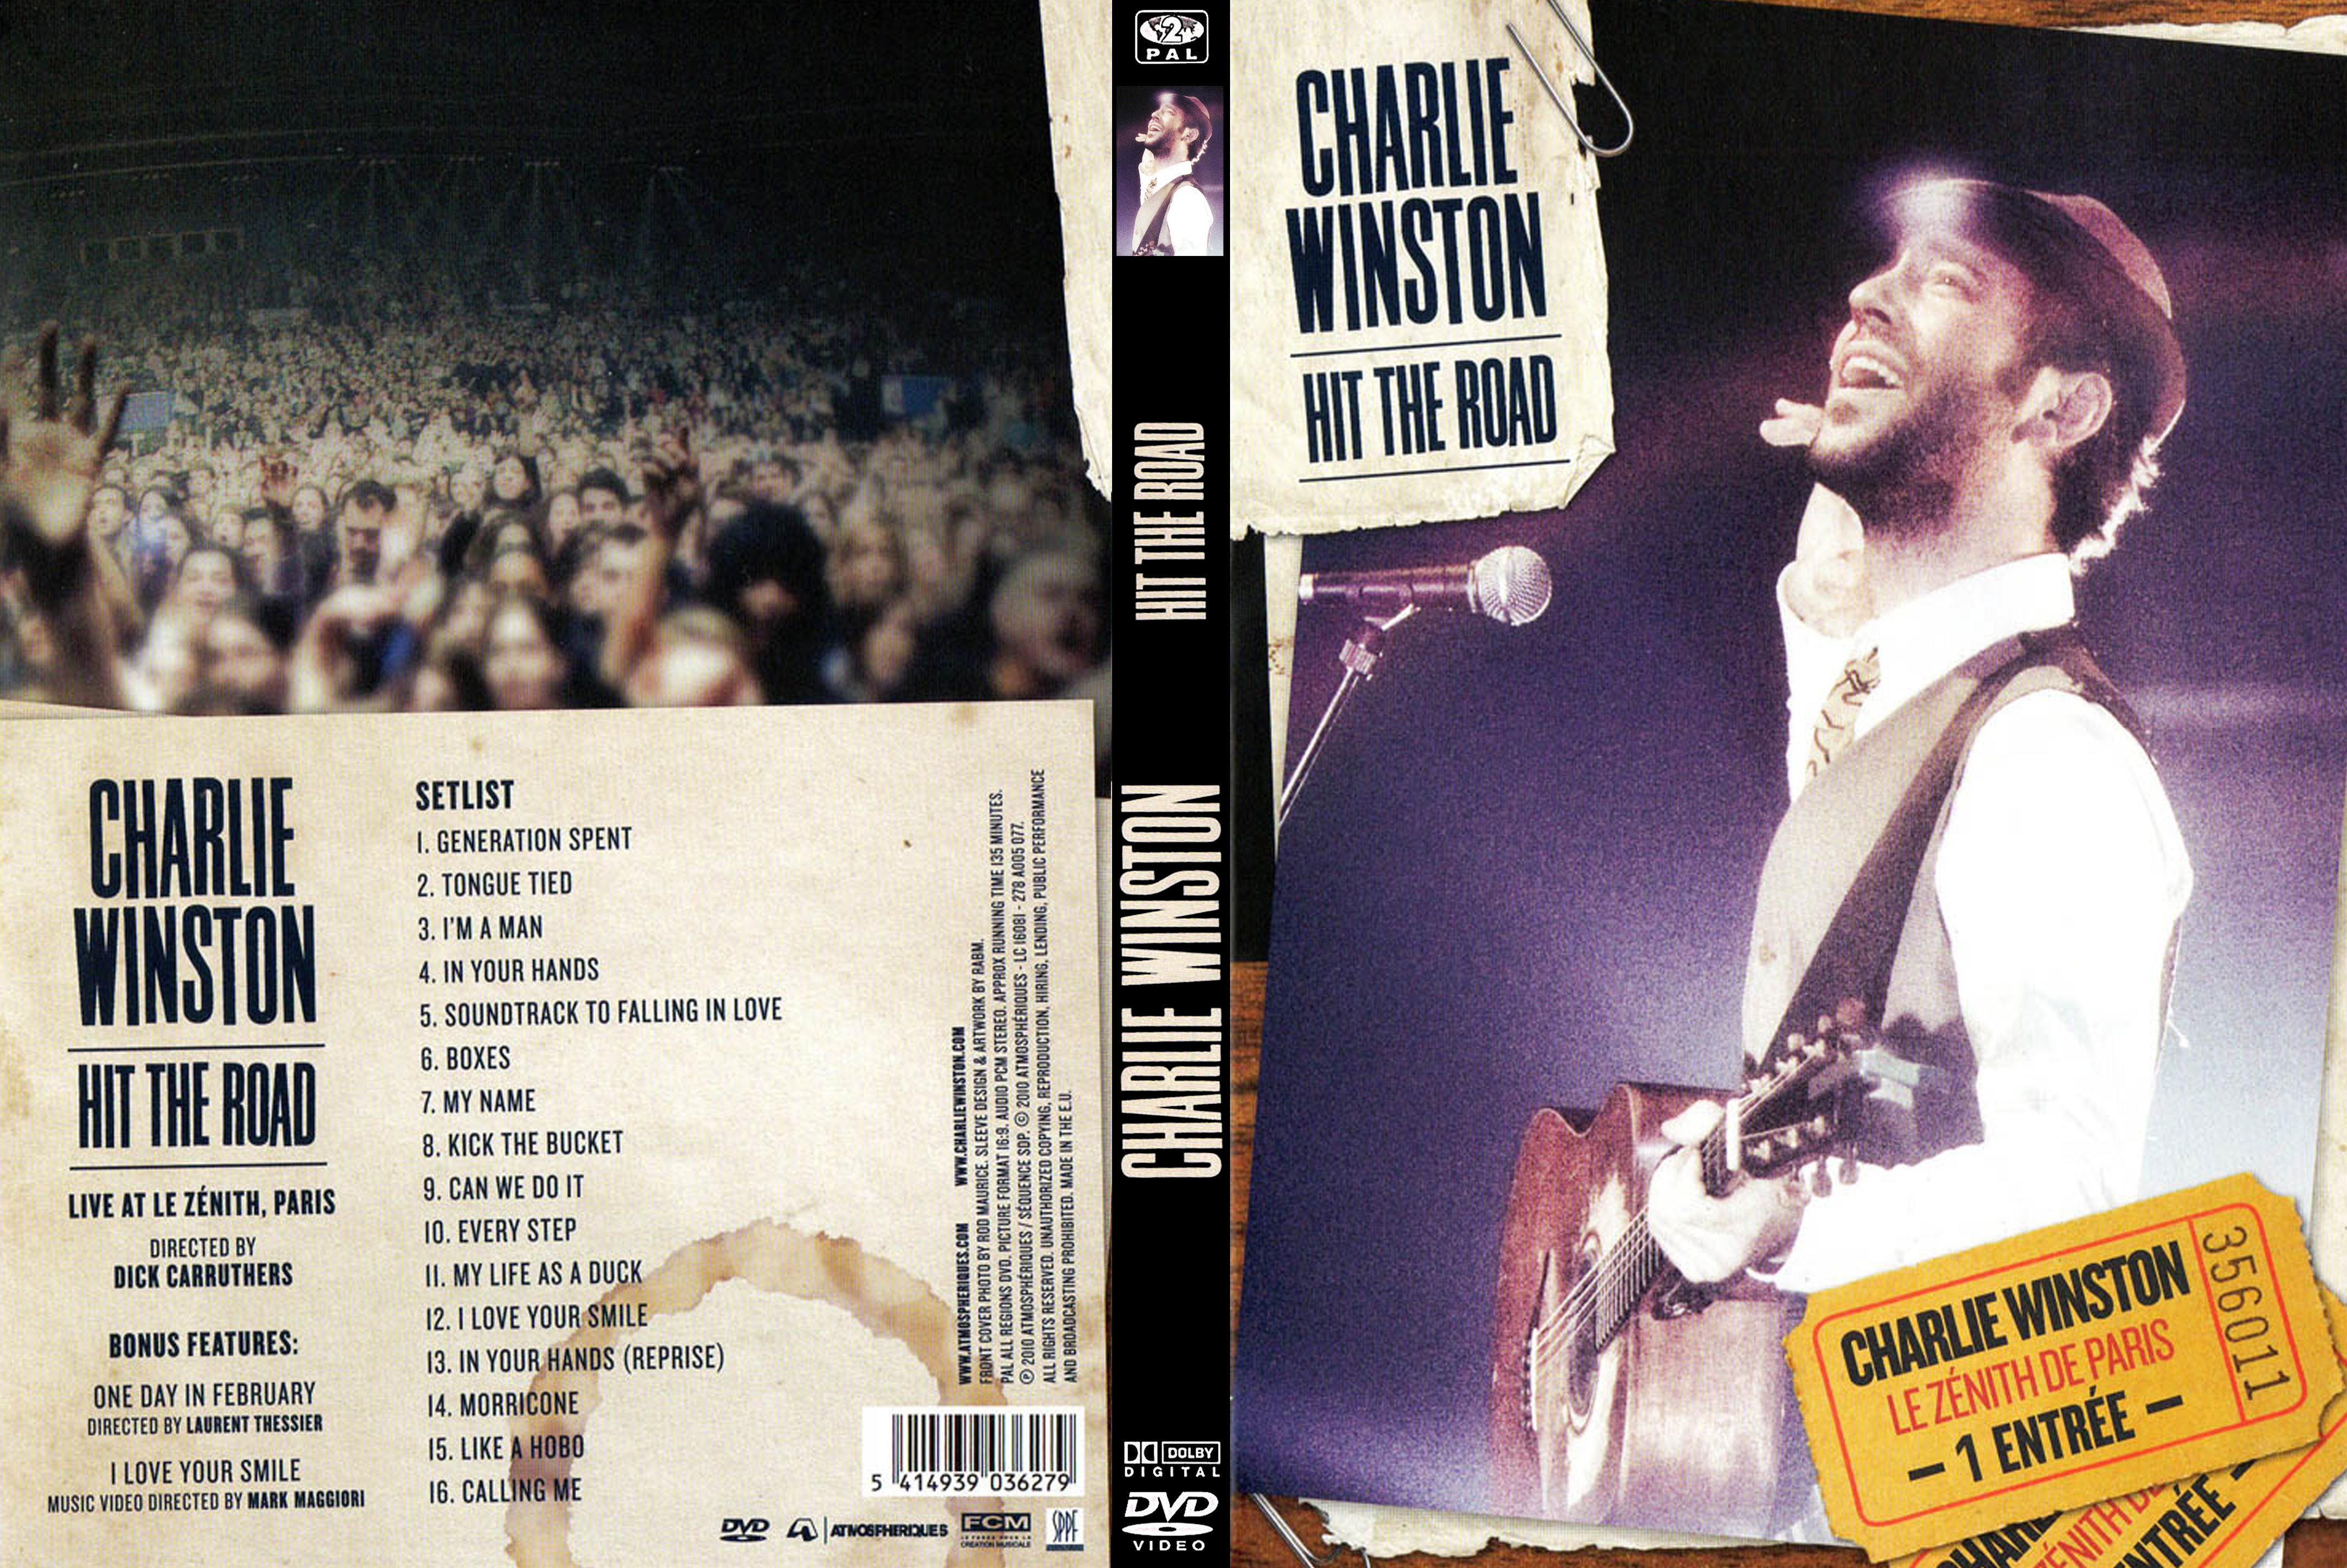 Jaquette DVD Charlie Winston - Hit the road custom